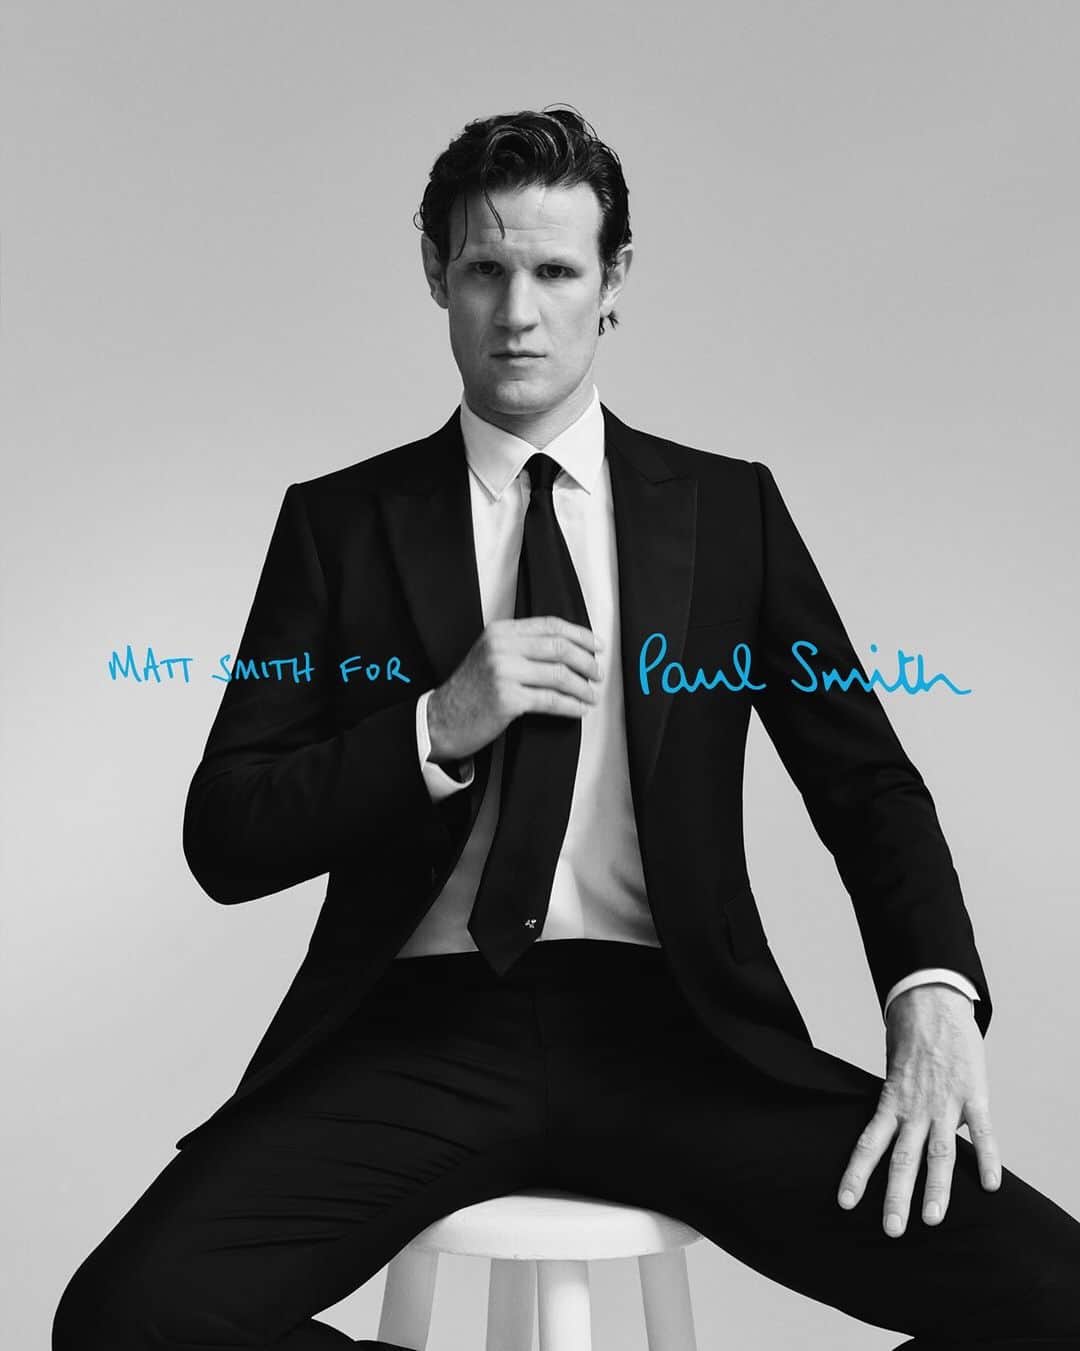 Paul Smithのインスタグラム：「Matt Smith for Paul Smith.  The actor stars in our new campaign. “Paul Smith has provided classic, inventive, and colourful tailoring for years. At its heart is the brilliant legend that is Paul Smith himself. To work with him and get to know him personally has been a complete honour,” he says.  Tap the link in @paulsmithdesign bio to learn more.   #TheSmiths #MattSmith #MattSmithforPaulSmith」